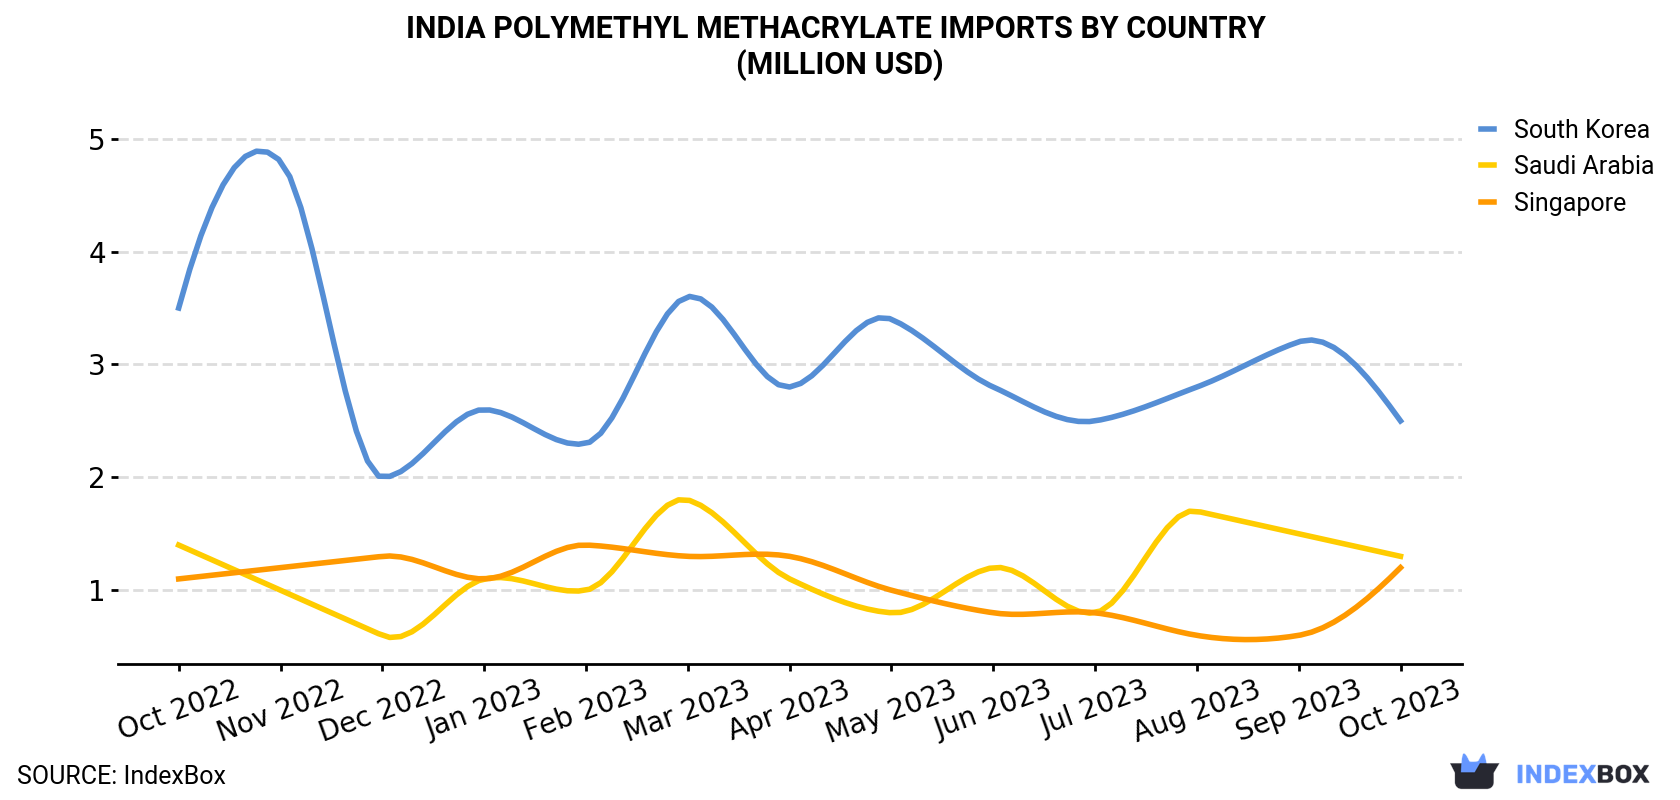 India Polymethyl Methacrylate Imports By Country (Million USD)